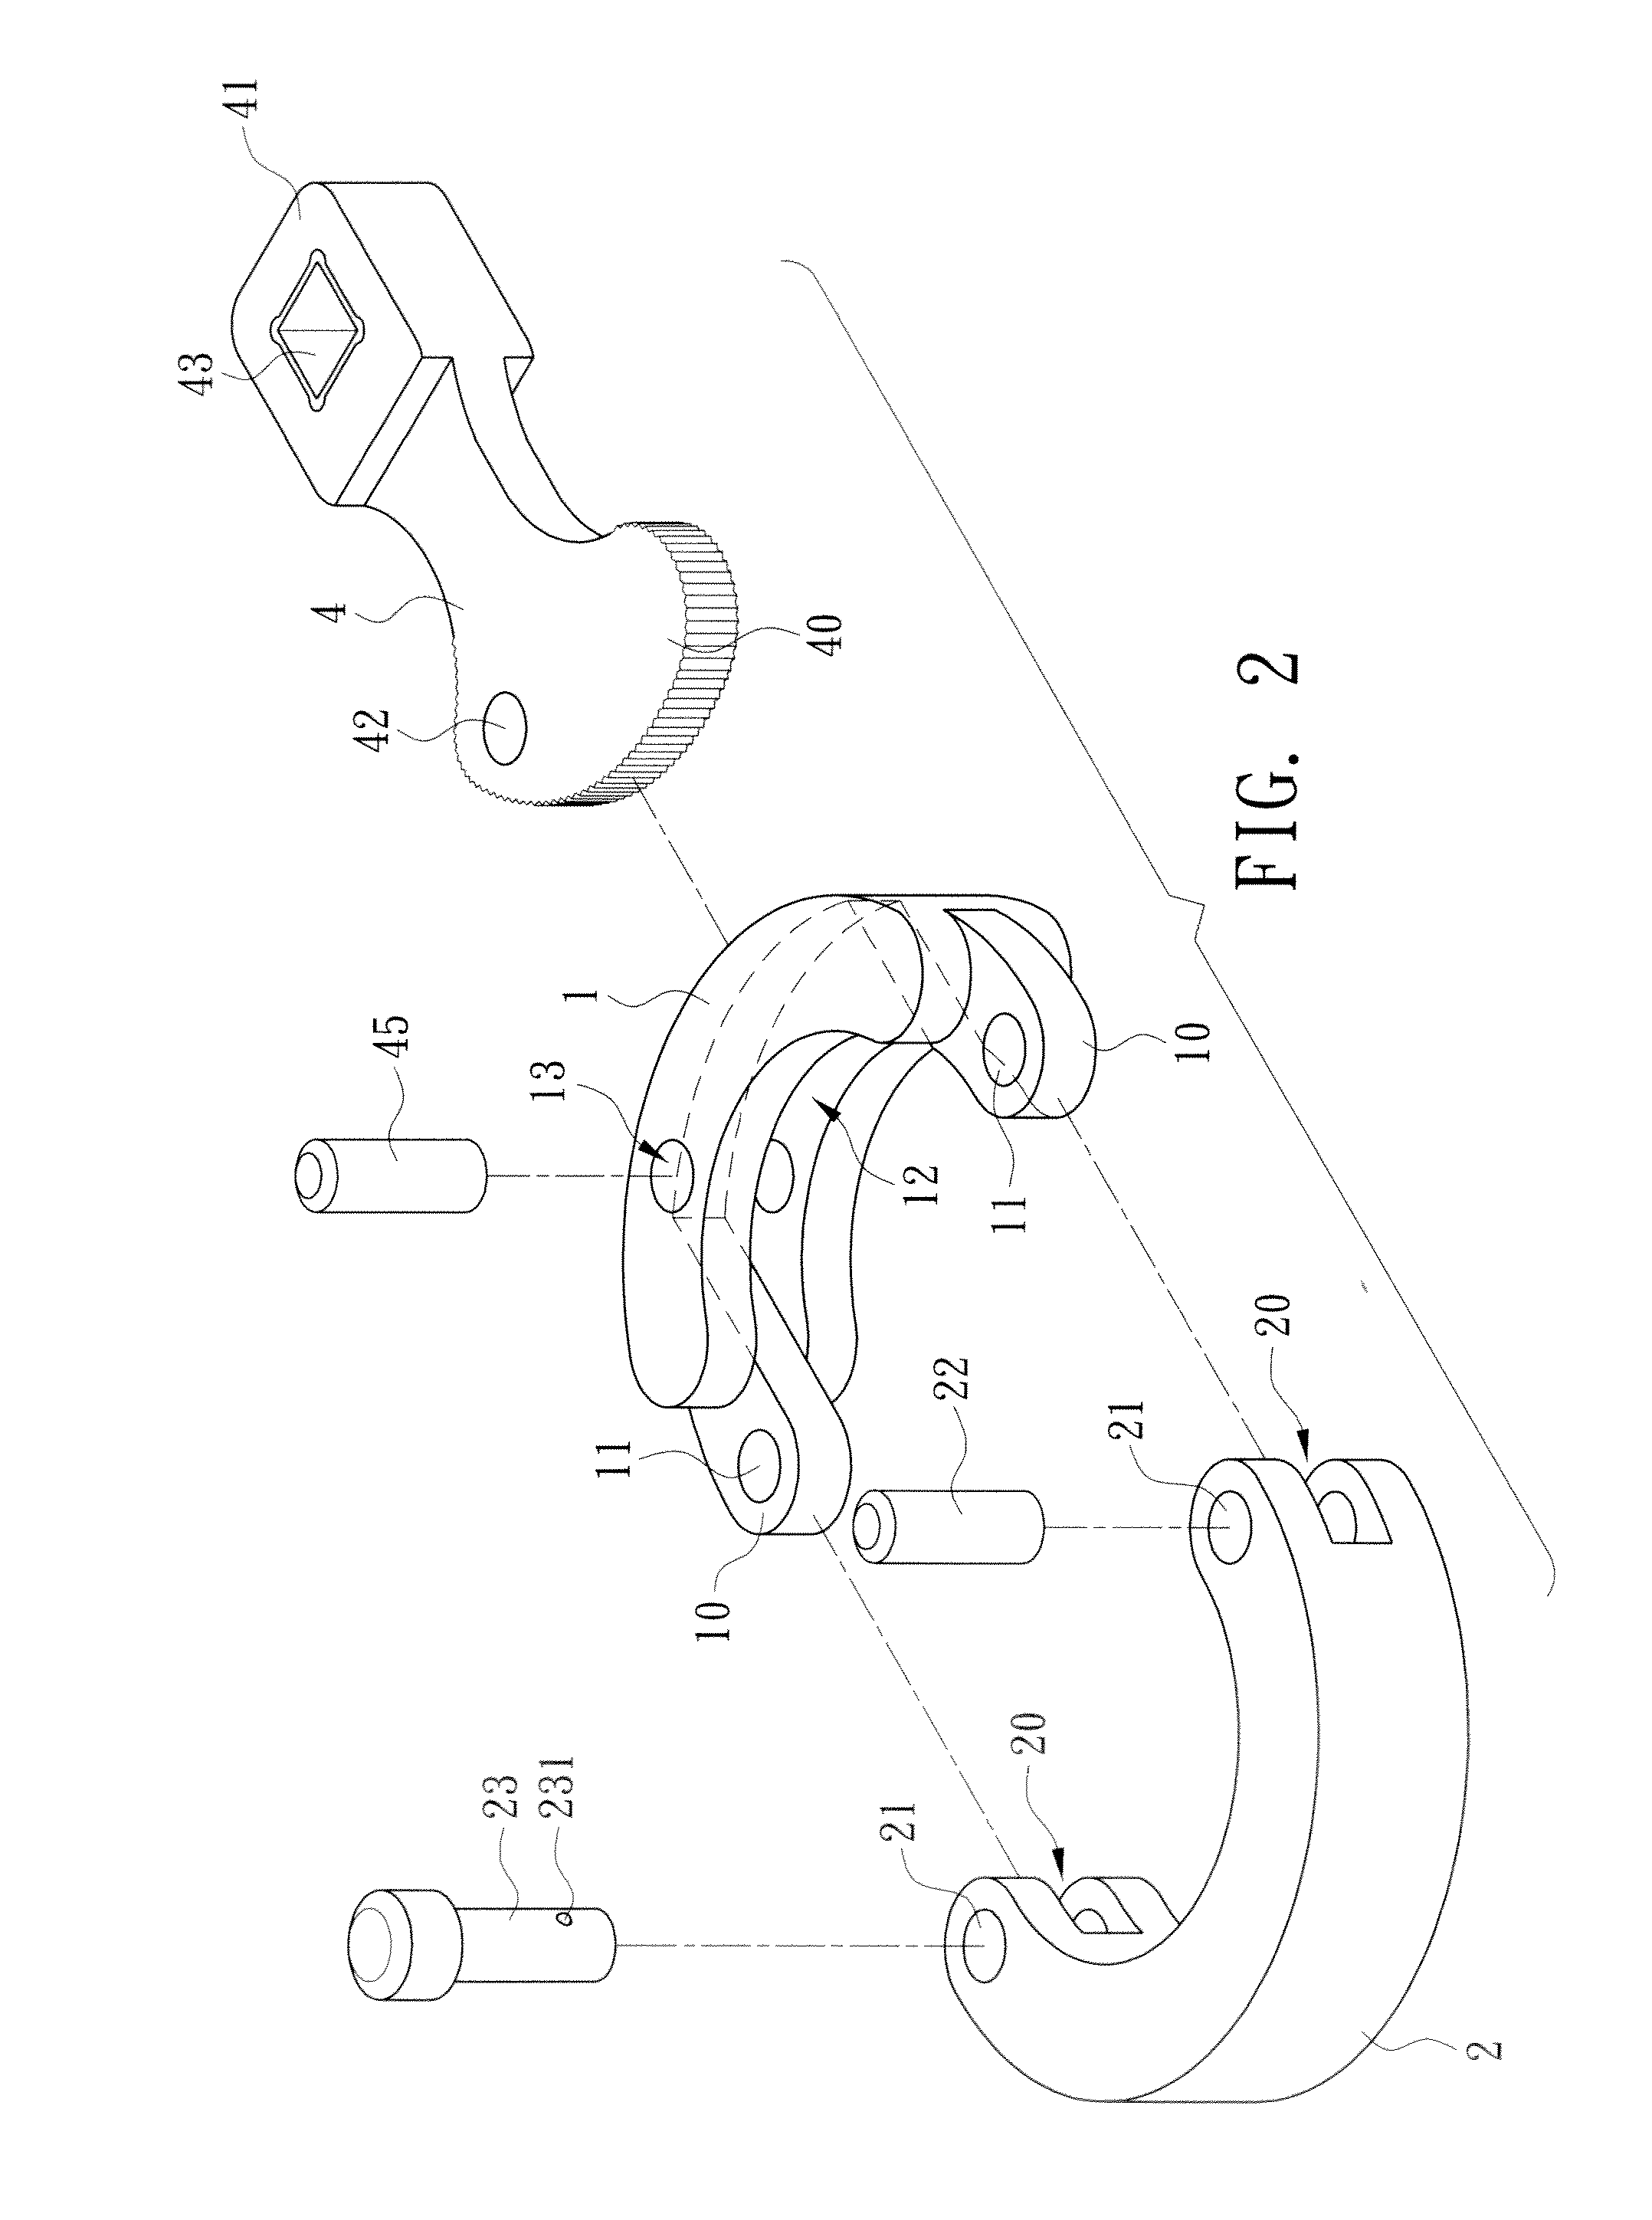 Mounting and dismounting device for cylindrical bodies